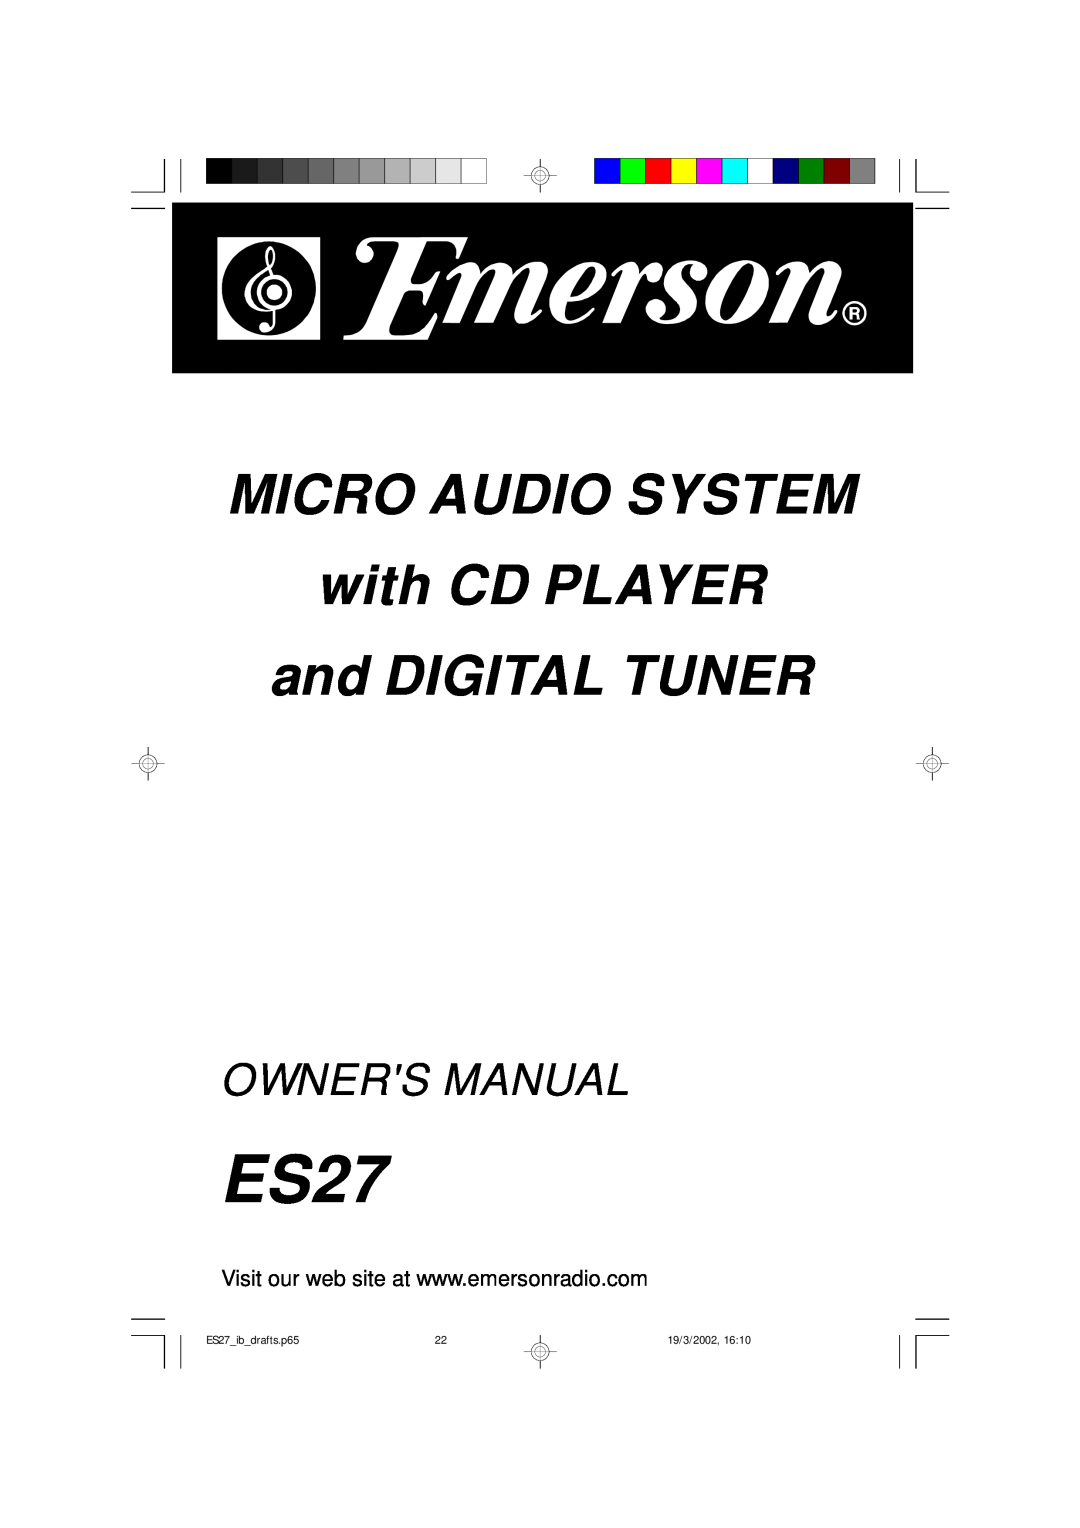 Emerson owner manual MICRO AUDIO SYSTEM with CD PLAYER, and DIGITAL TUNER, ES27 ib drafts.p65, 19/3/2002 